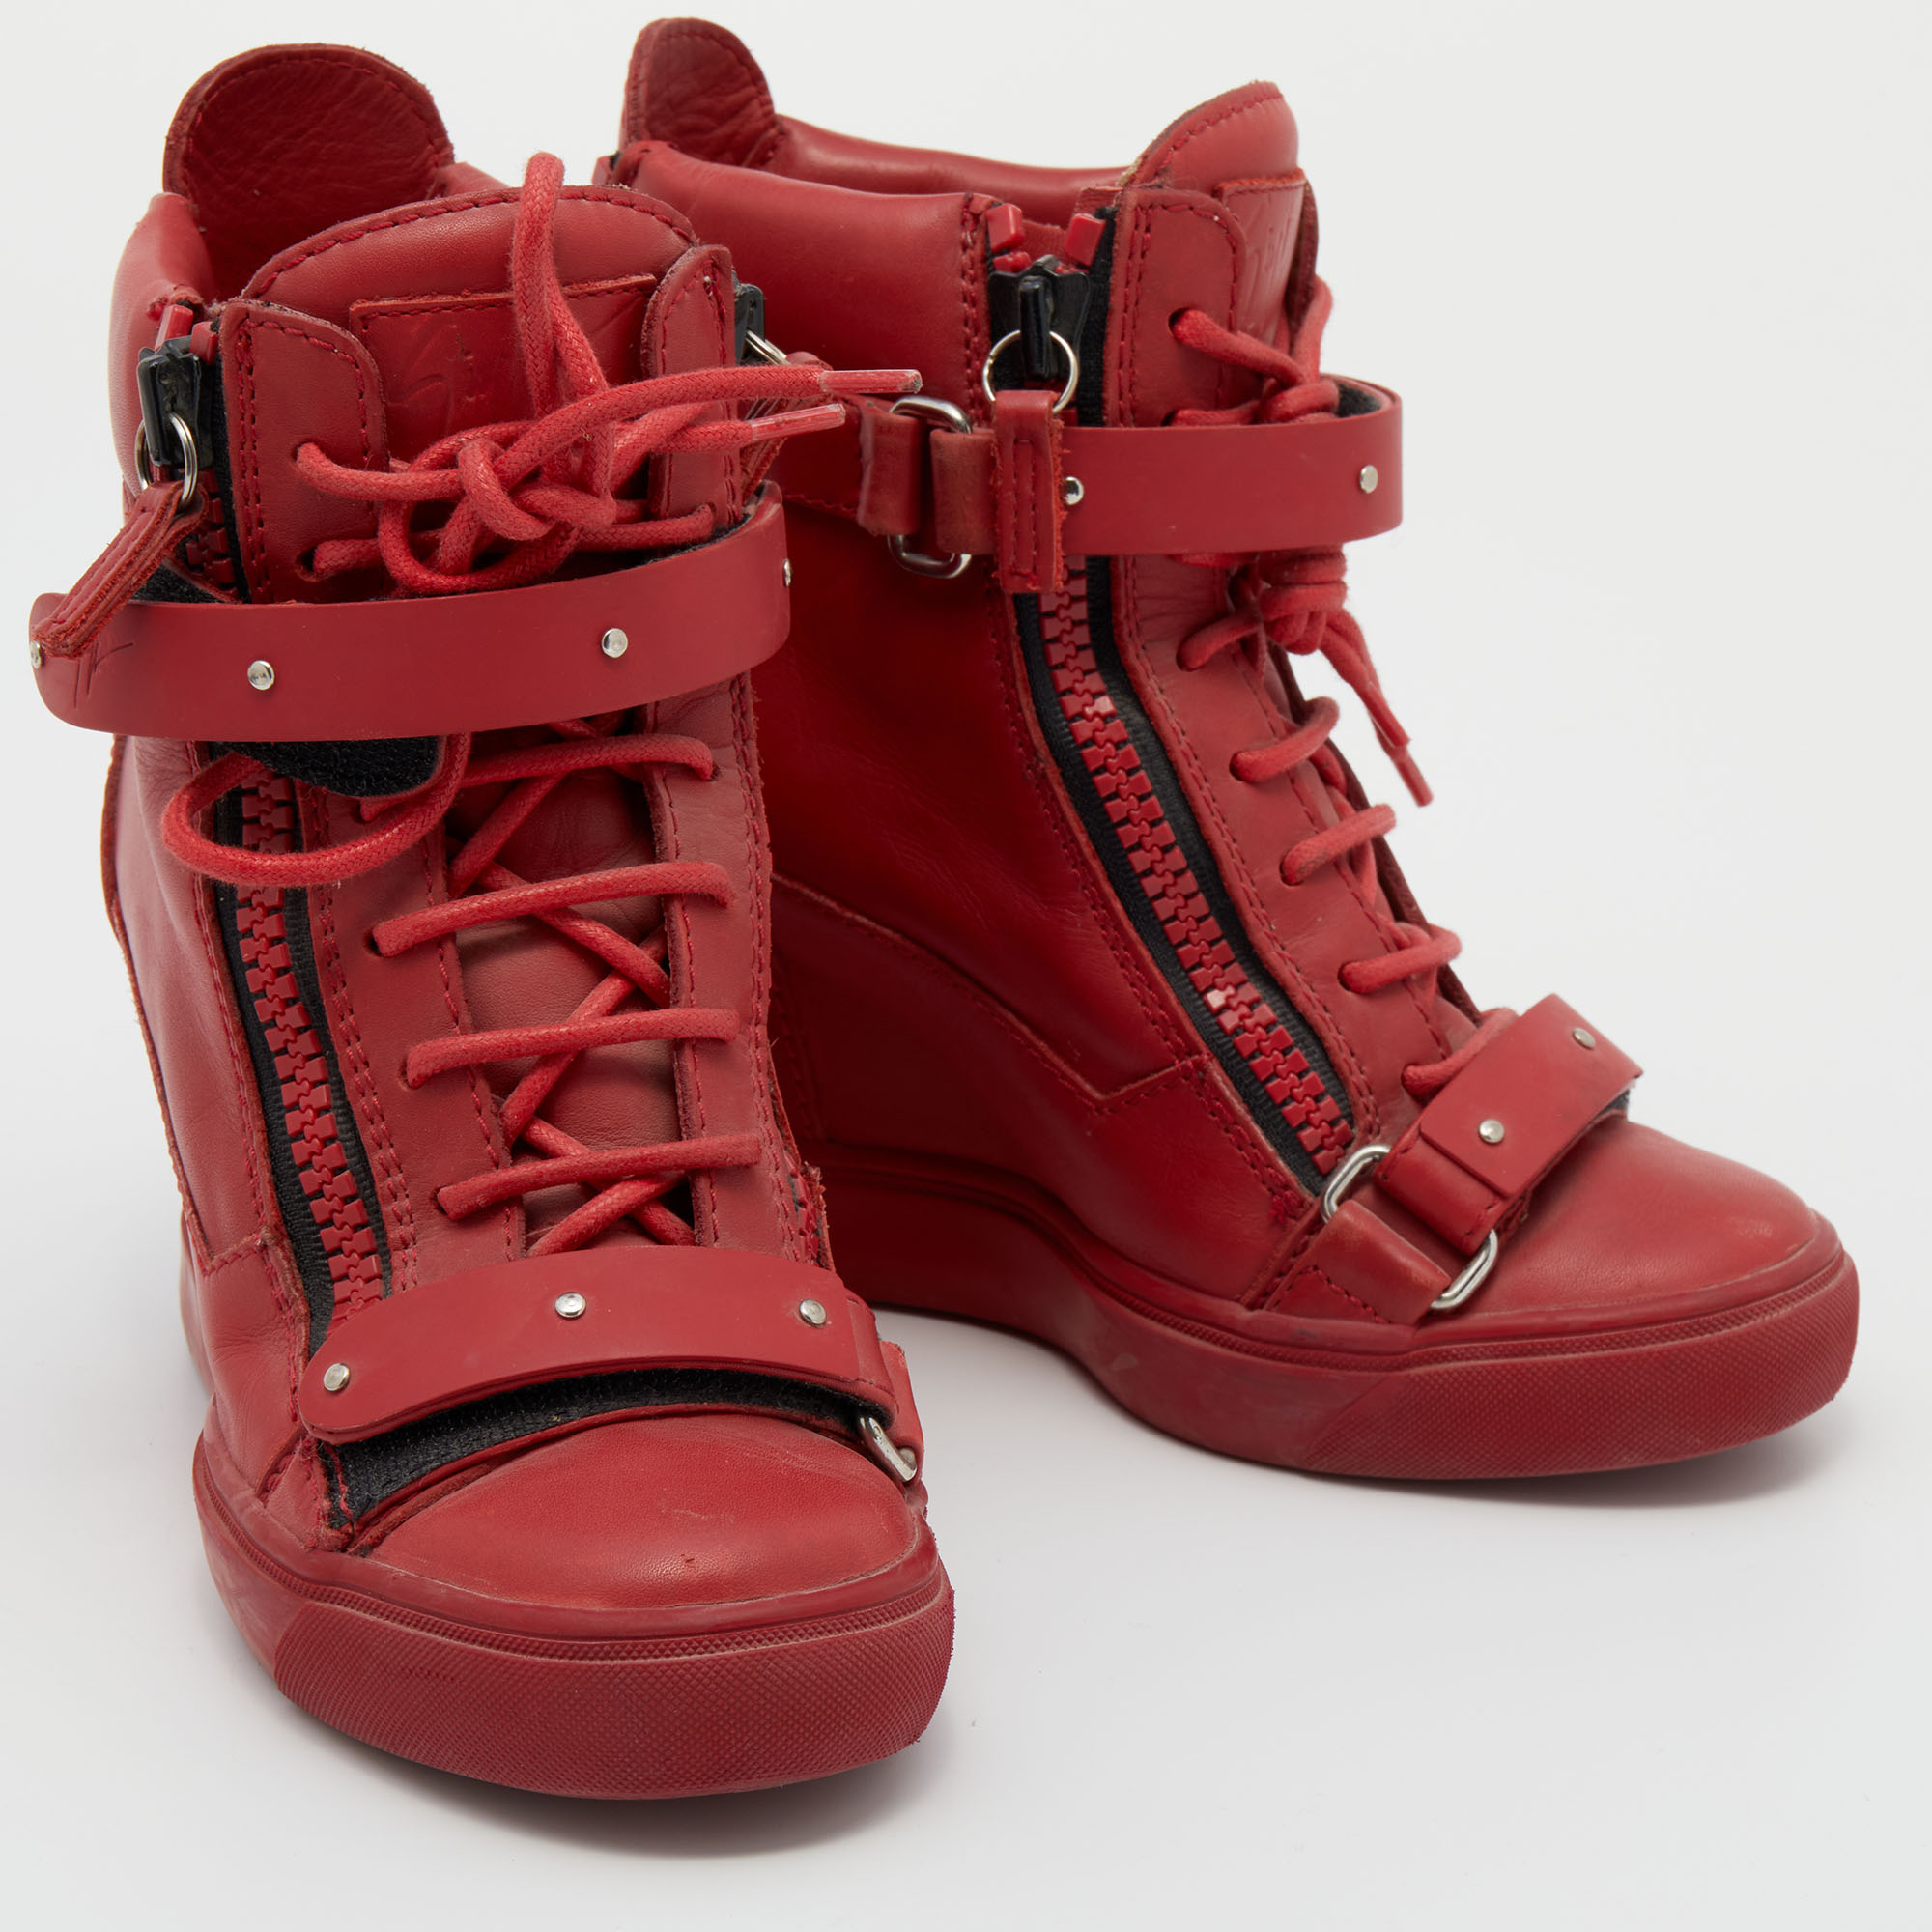 Giuseppe Zanotti Red Leather High Top Wedge Sneakers Size 36.5